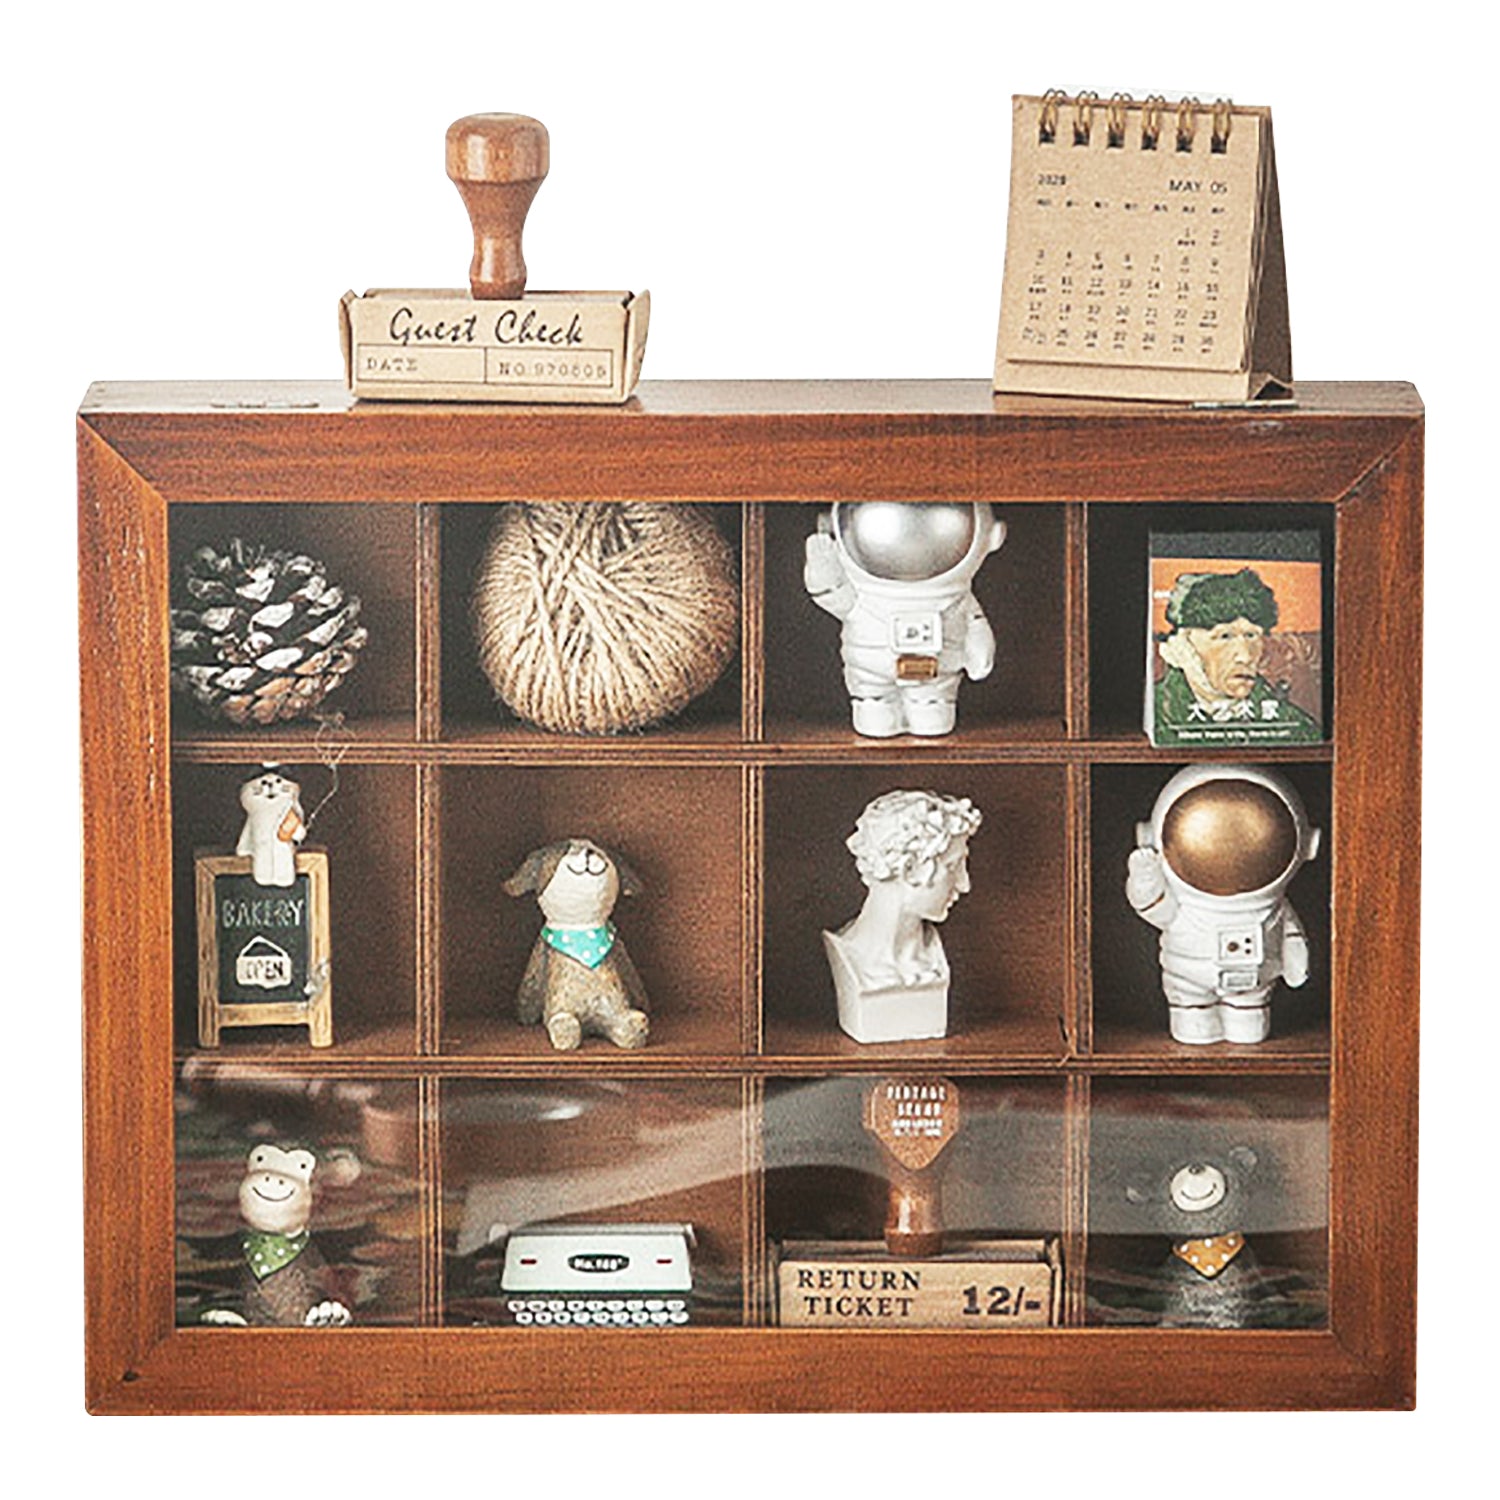 Load image into Gallery viewer, Clear Display Wood Cubby Cabinet | 12 Storage Cubbies Mini Display Wooden Box Shelf